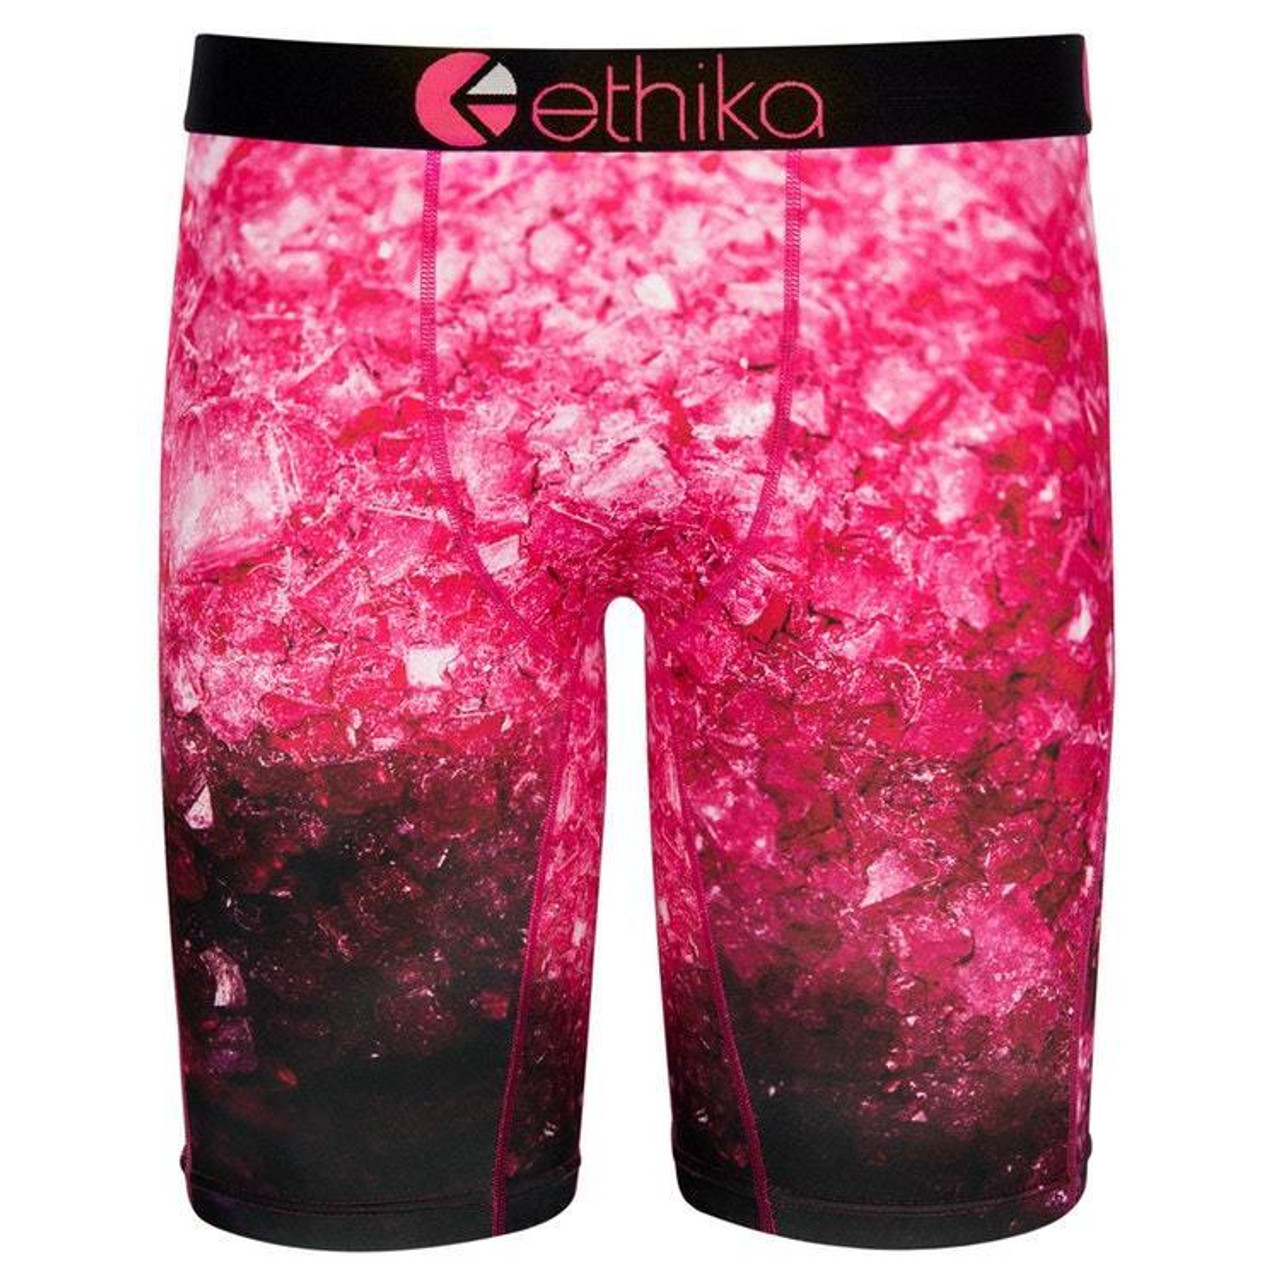 Red Ethika Underwear 3XL South Africa Factory Outlet - Ethika